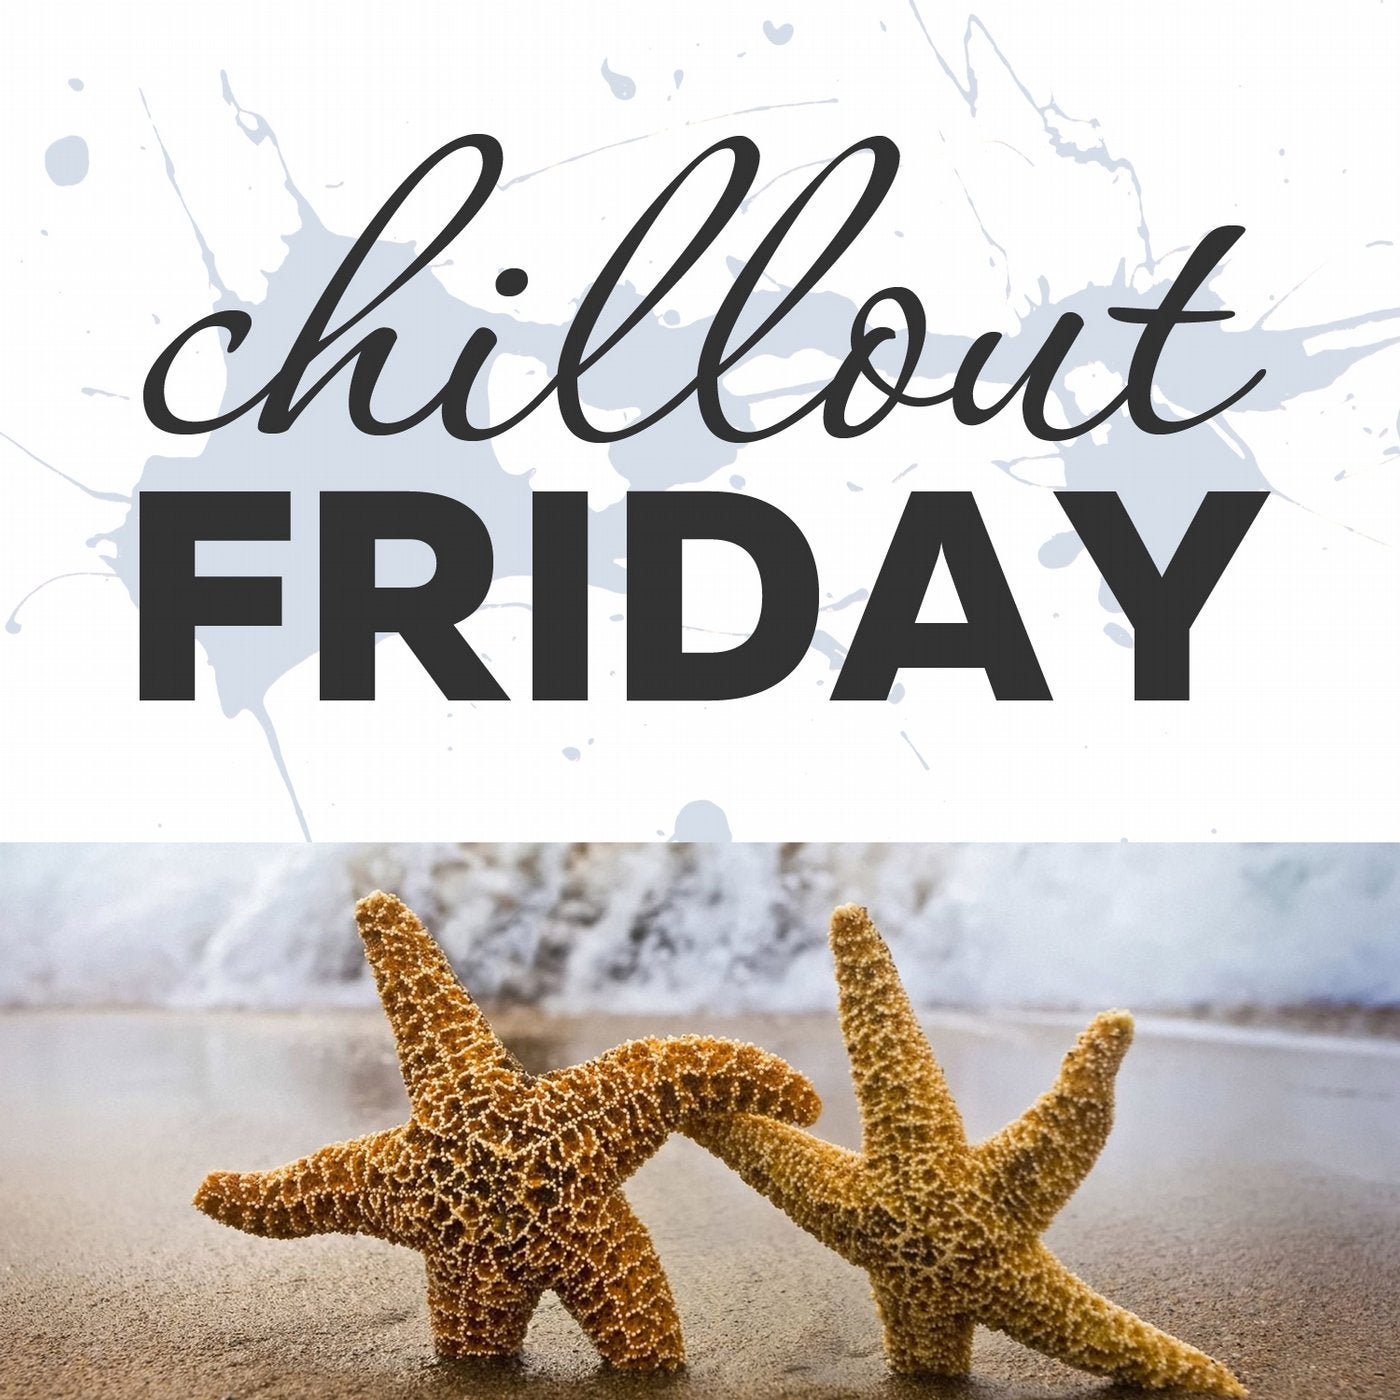 Chillout Friday Top 5 Best of Weeks #8